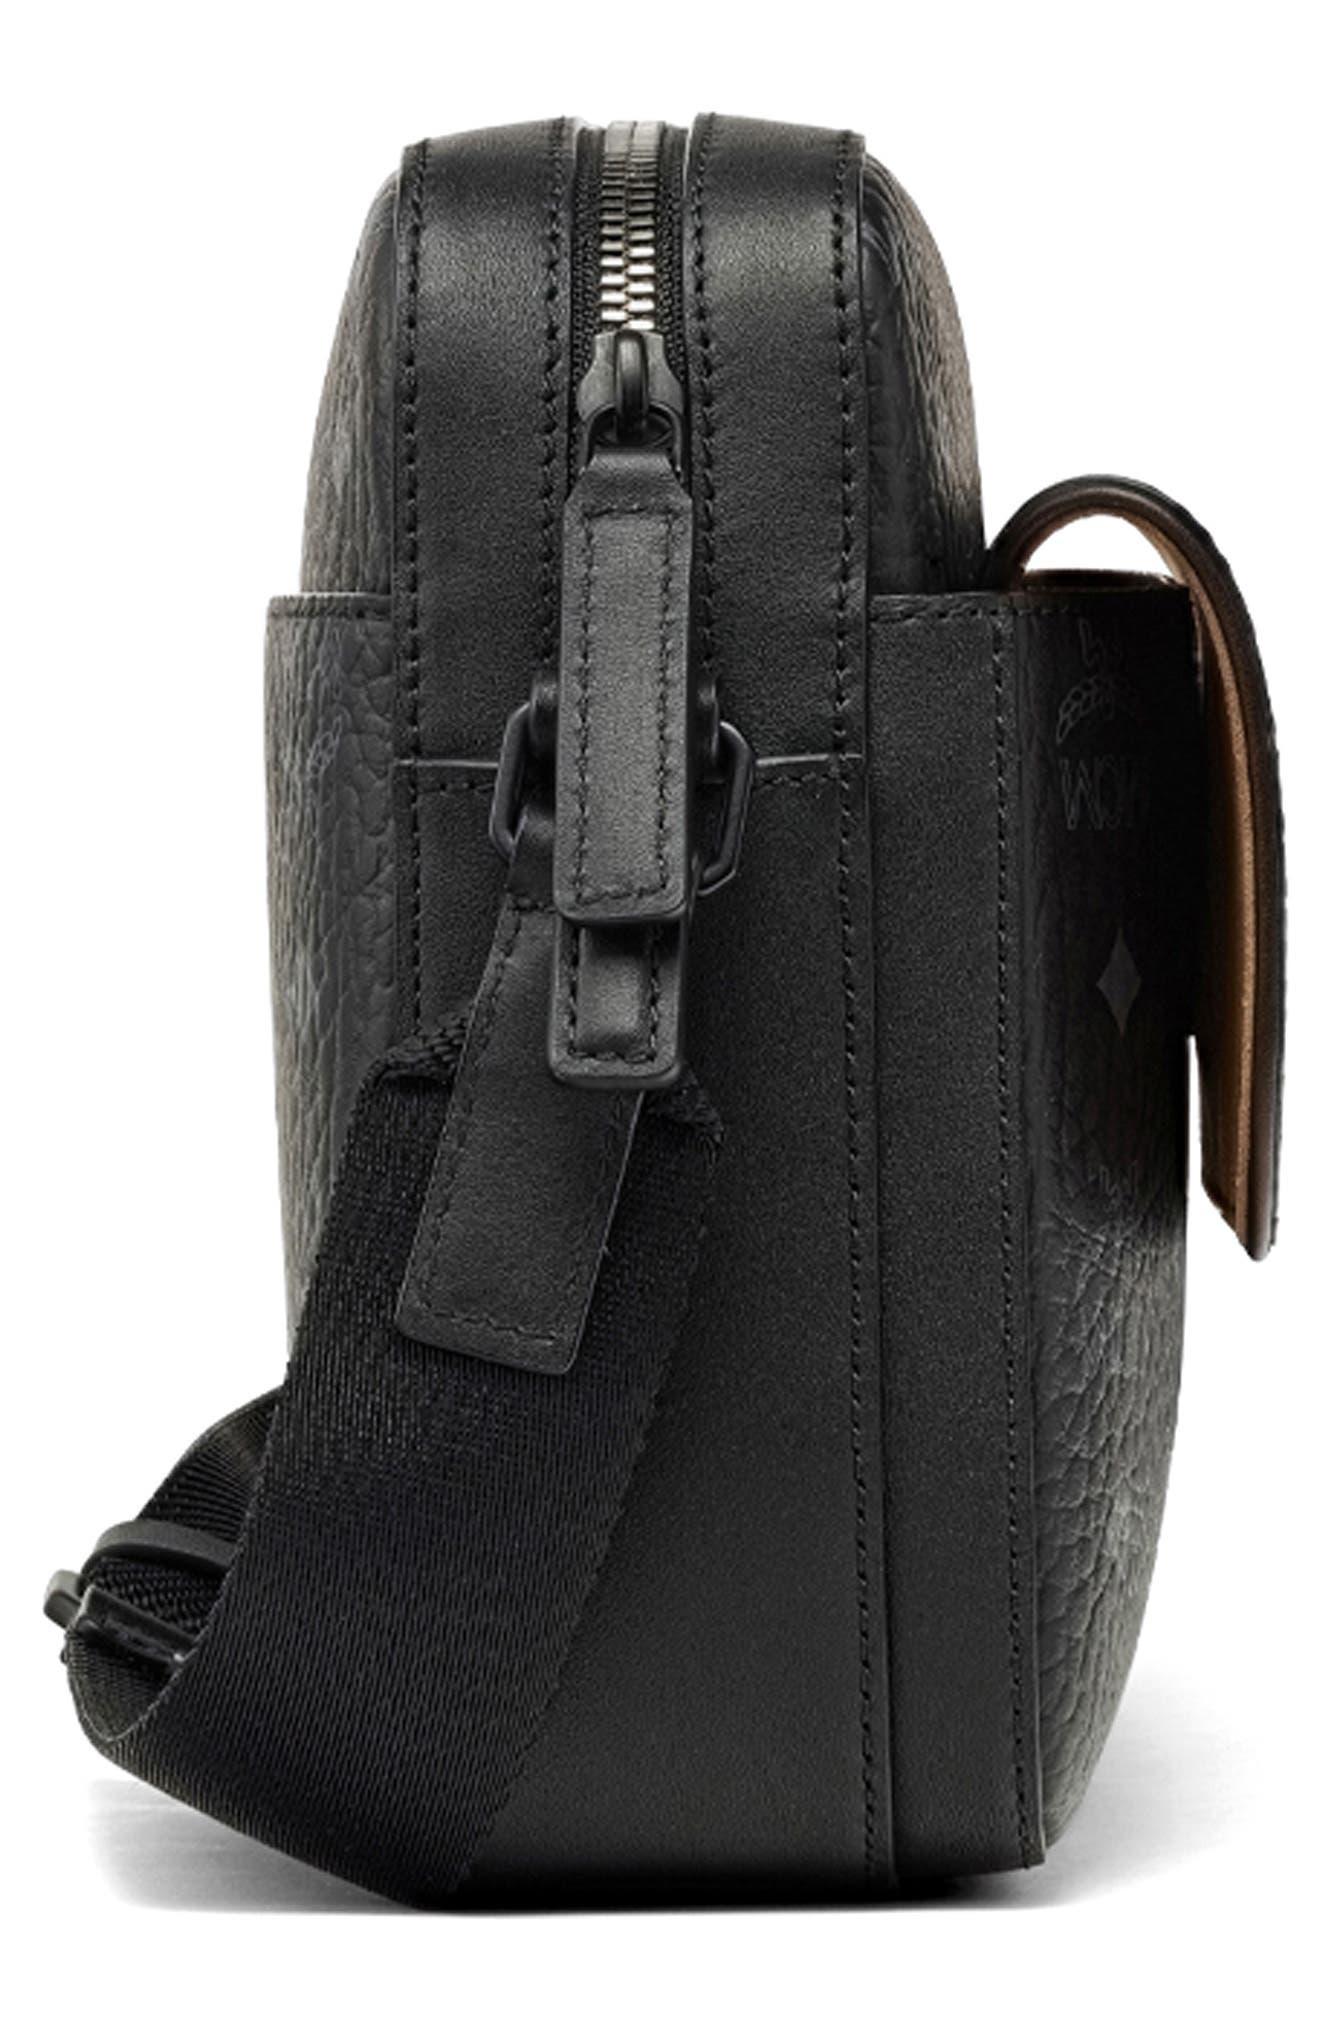 MCM Black/Grey Coated Canvas and Leather Crossbody Bag